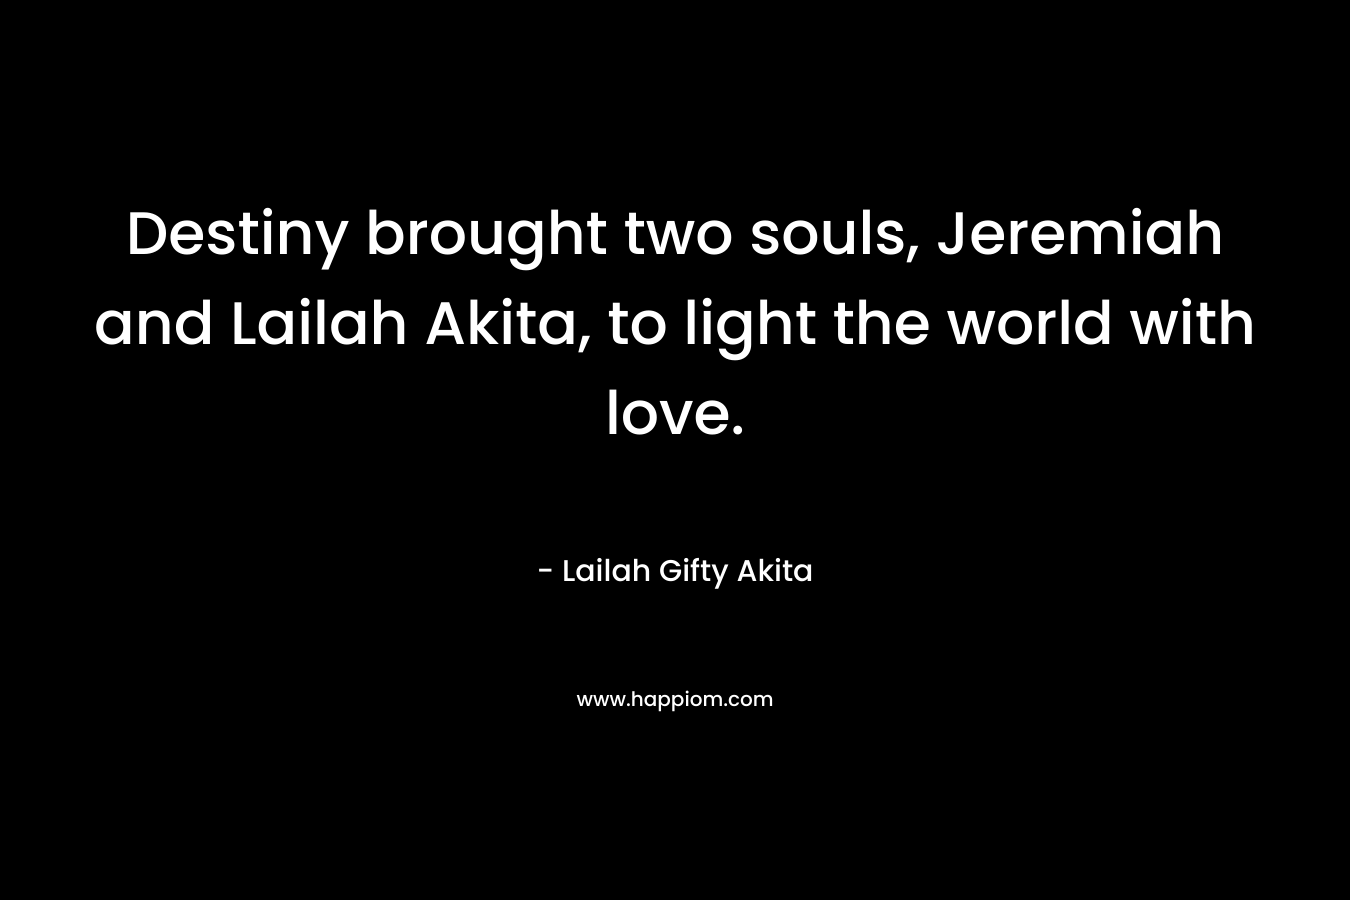 Destiny brought two souls, Jeremiah and Lailah Akita, to light the world with love.